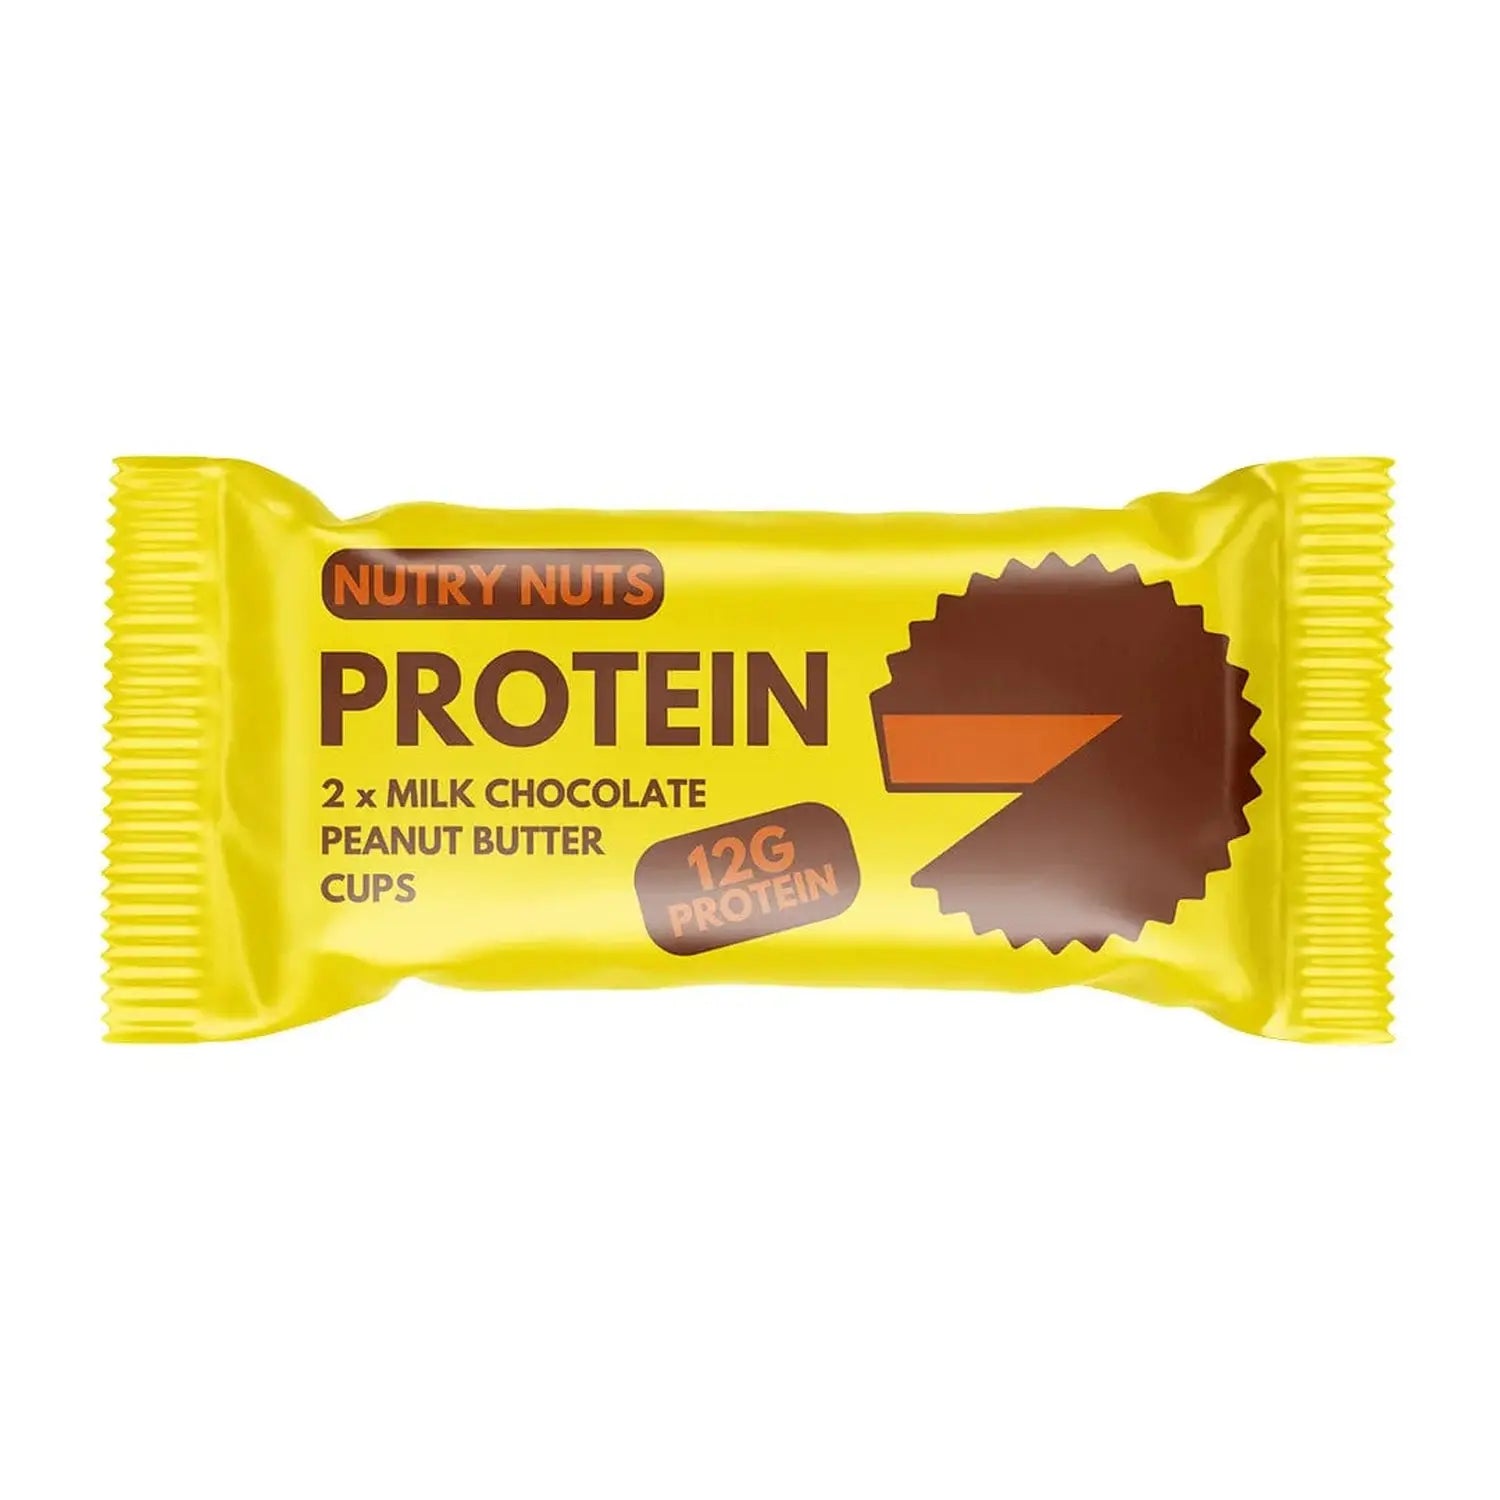 Nutry Nuts Nutry Nuts - Protein Peanut Butter Cups 42 g Milk Chocolate kaufen bei HighPowered.ch